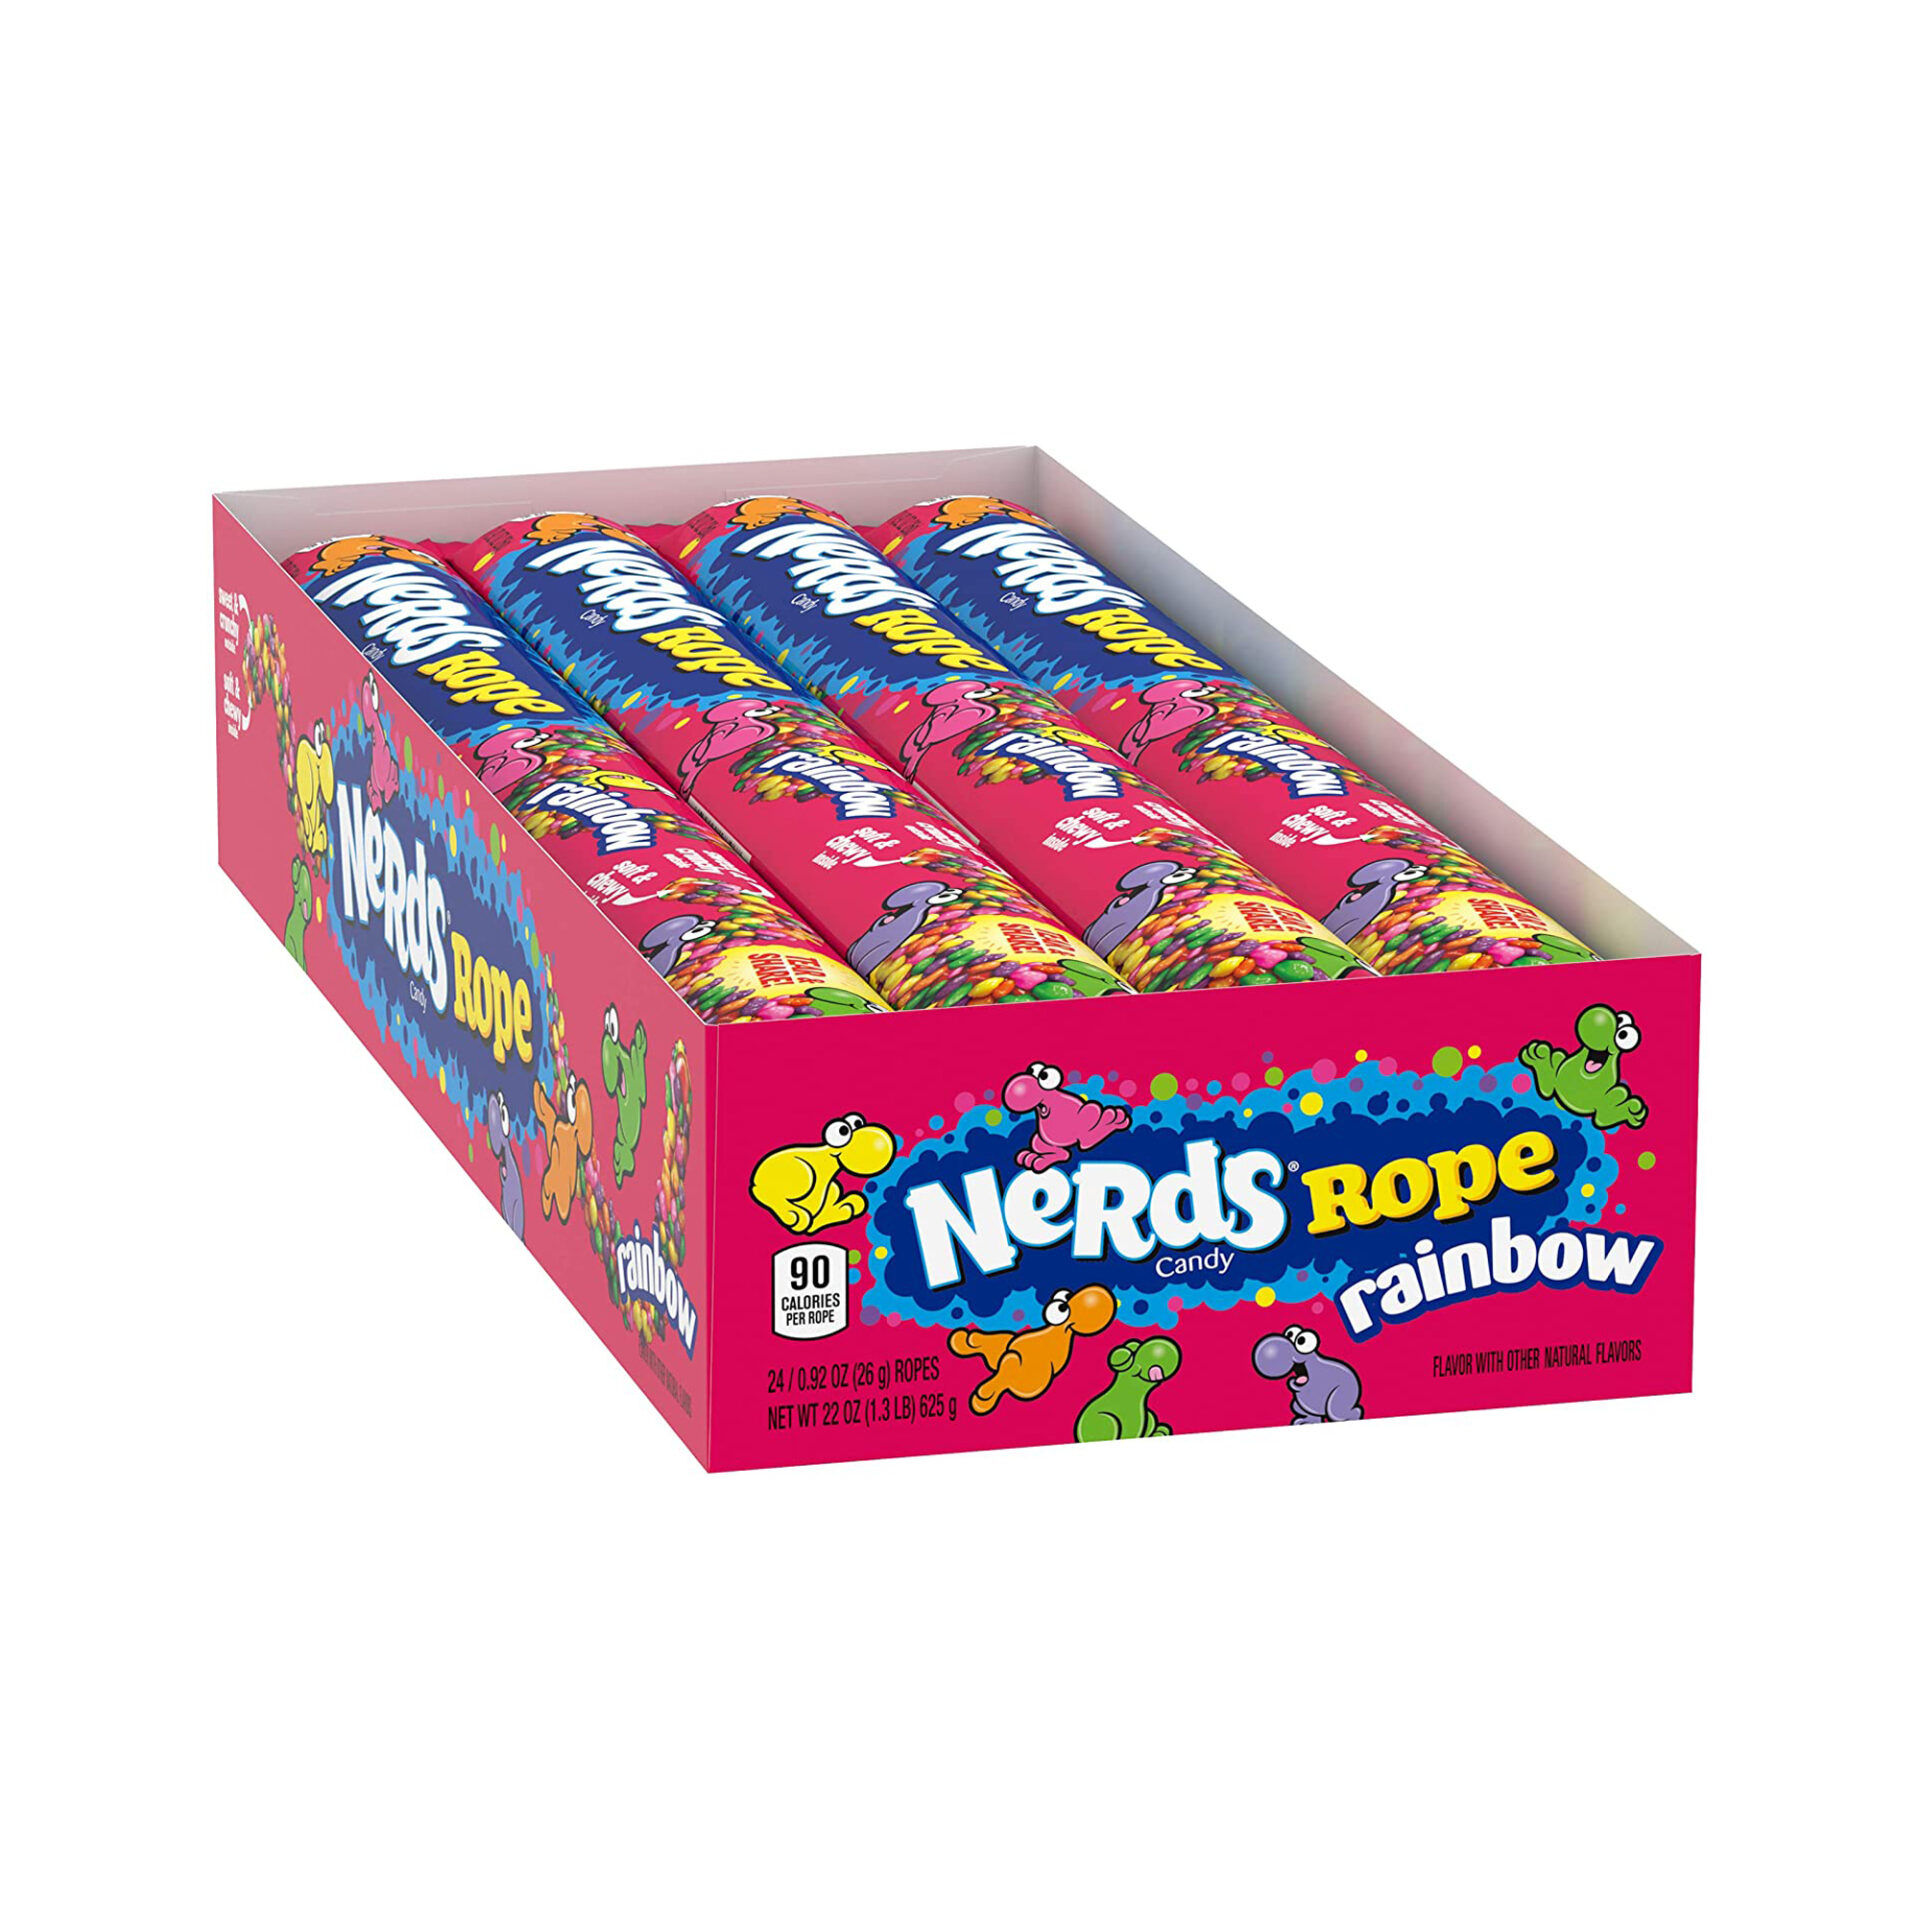 Nerds Rope Rainbow Candy 0.92 Ounce Package 24 Count - Volt Candy